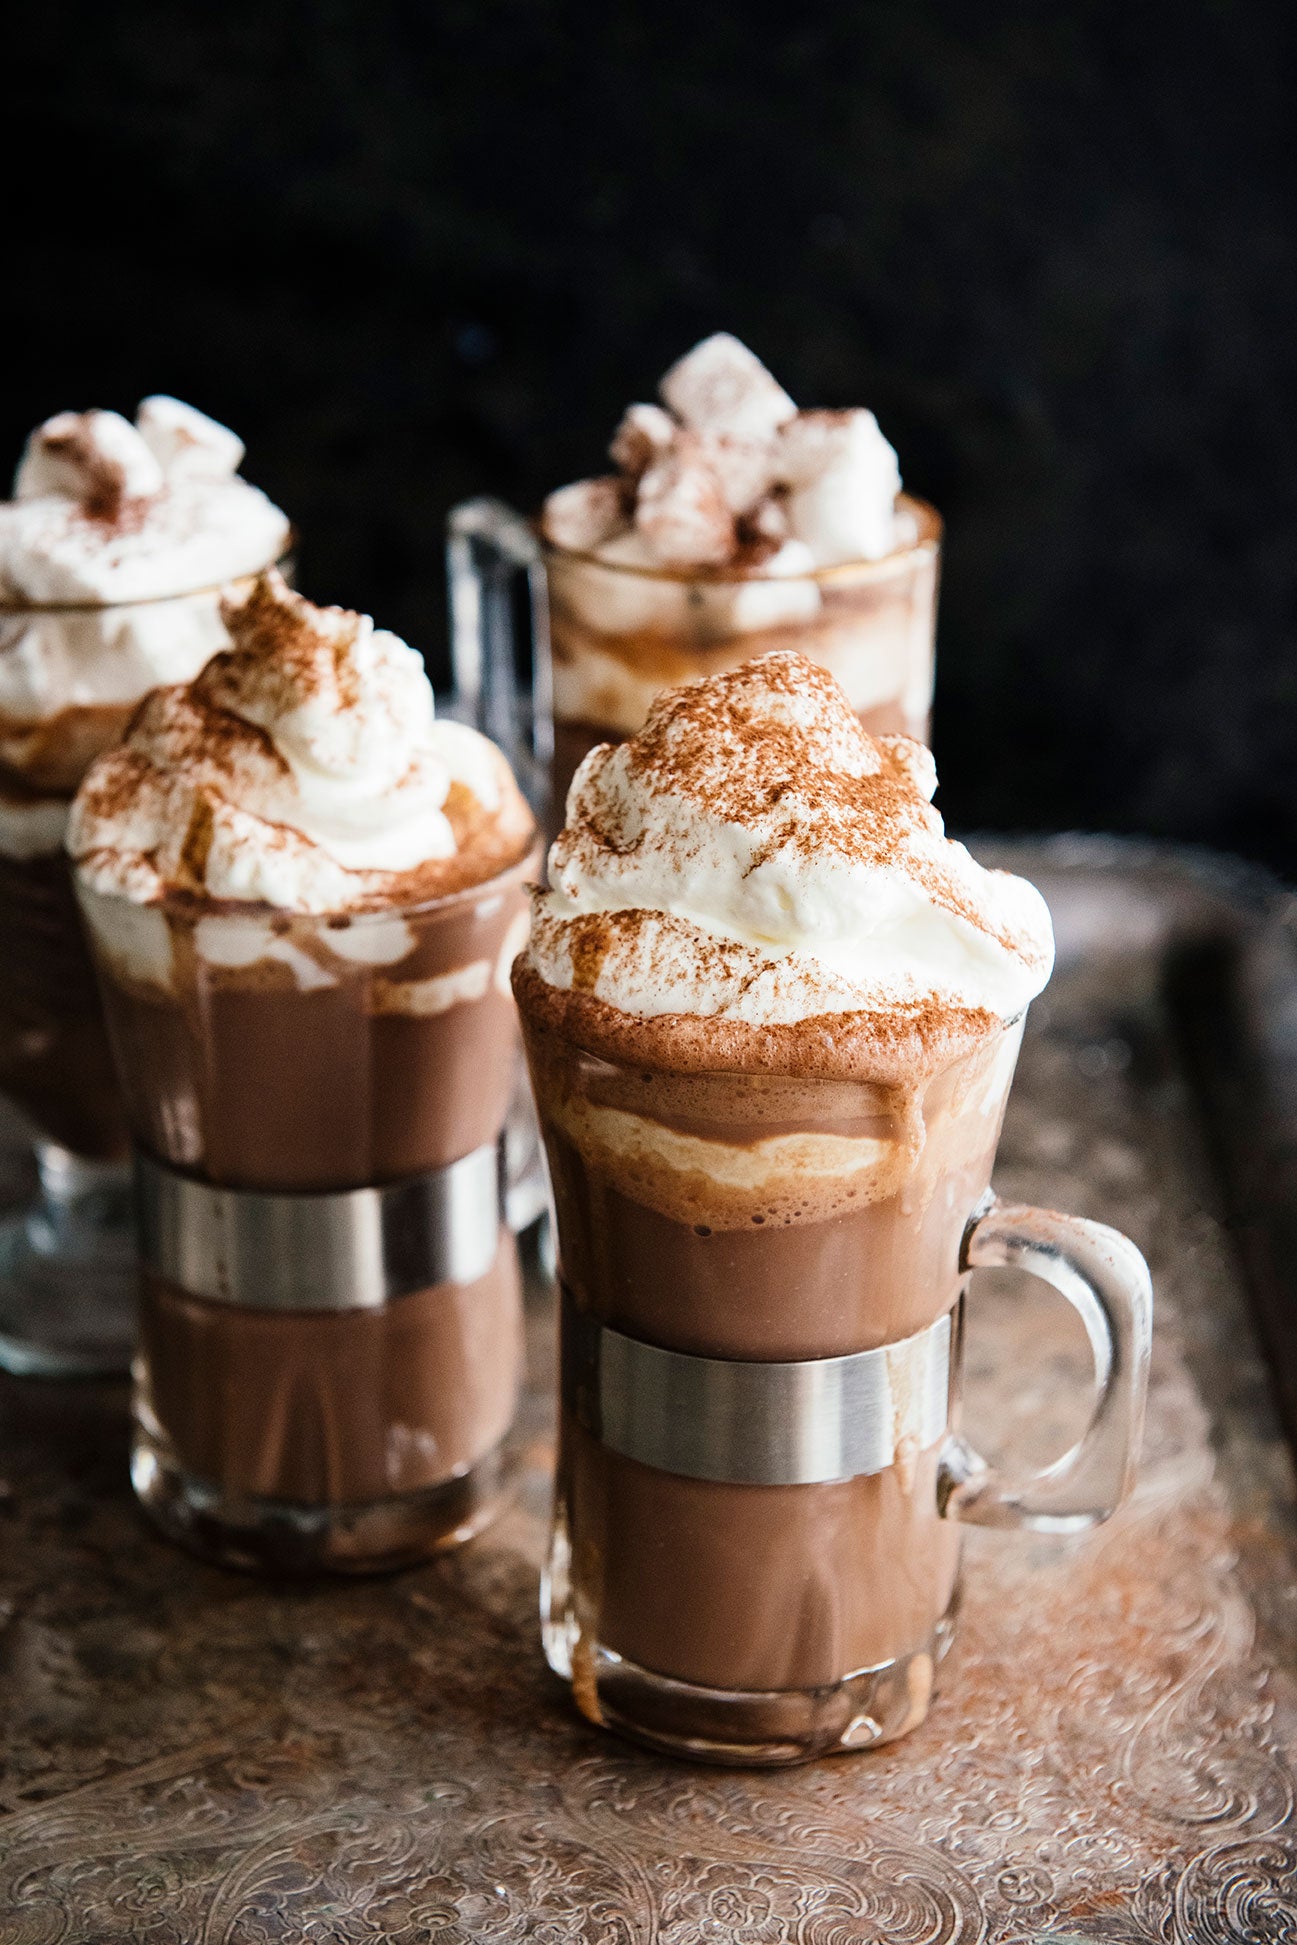 Glass mugs of hot cocoa with square marshmallows and soft scoops of whipped cream.